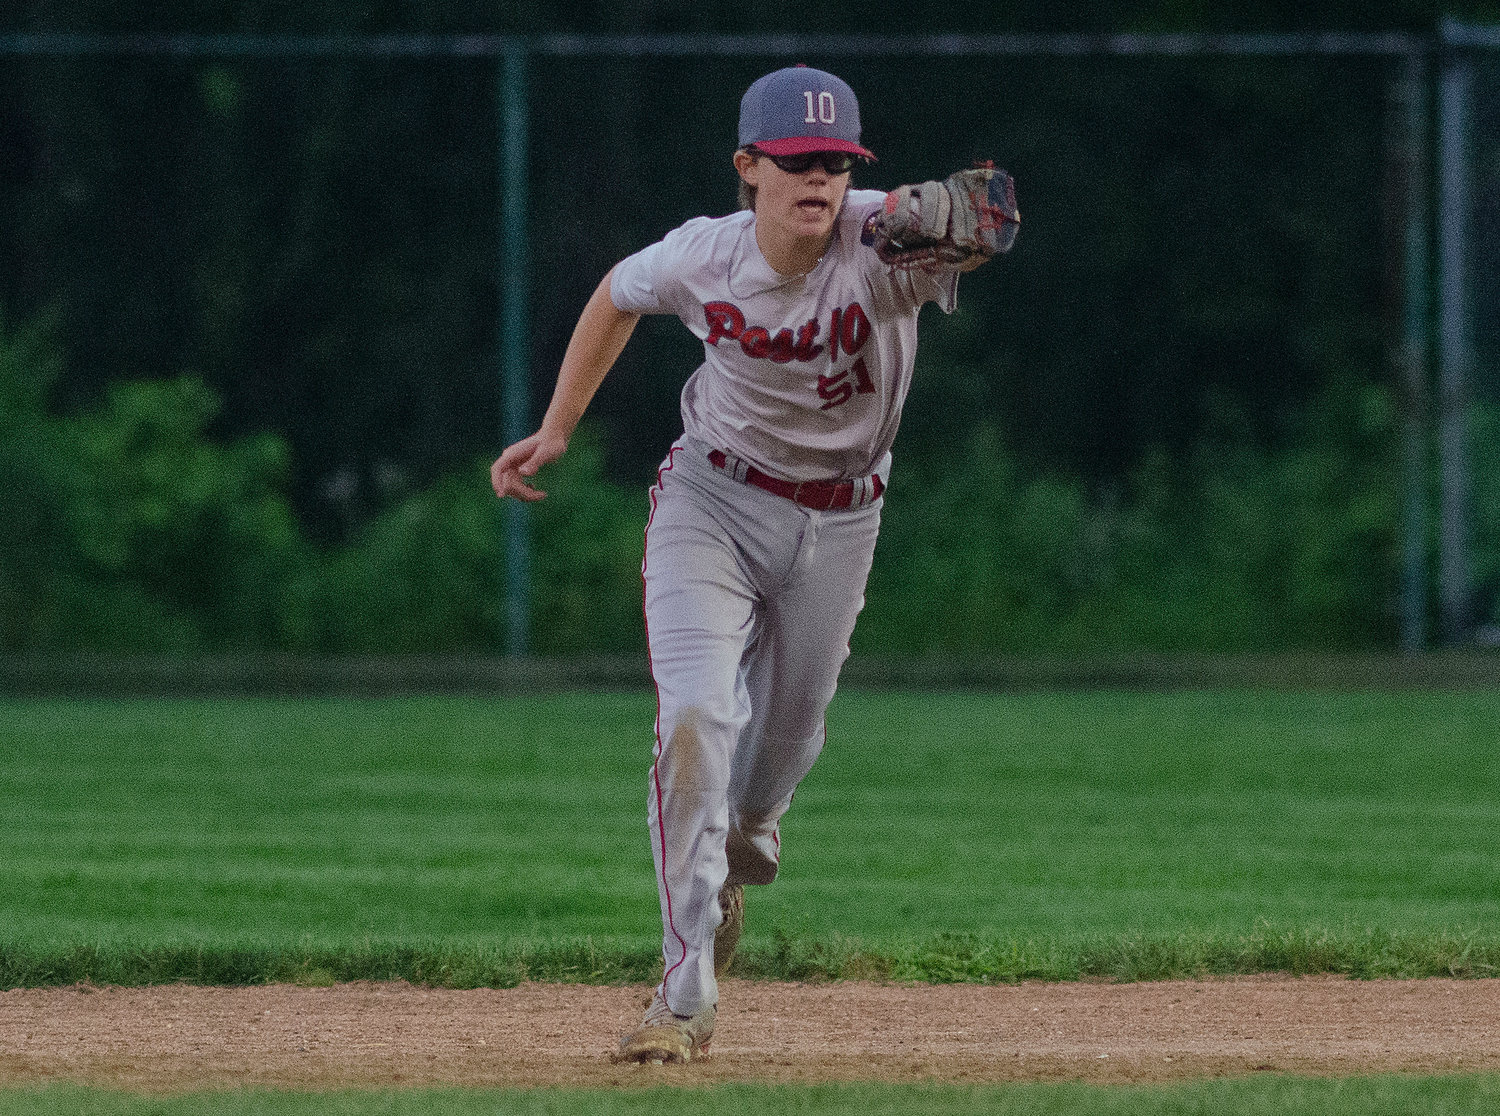 Brian Rutowski snares a line drive to secure the win Thursday night, July 29 for Post 10.